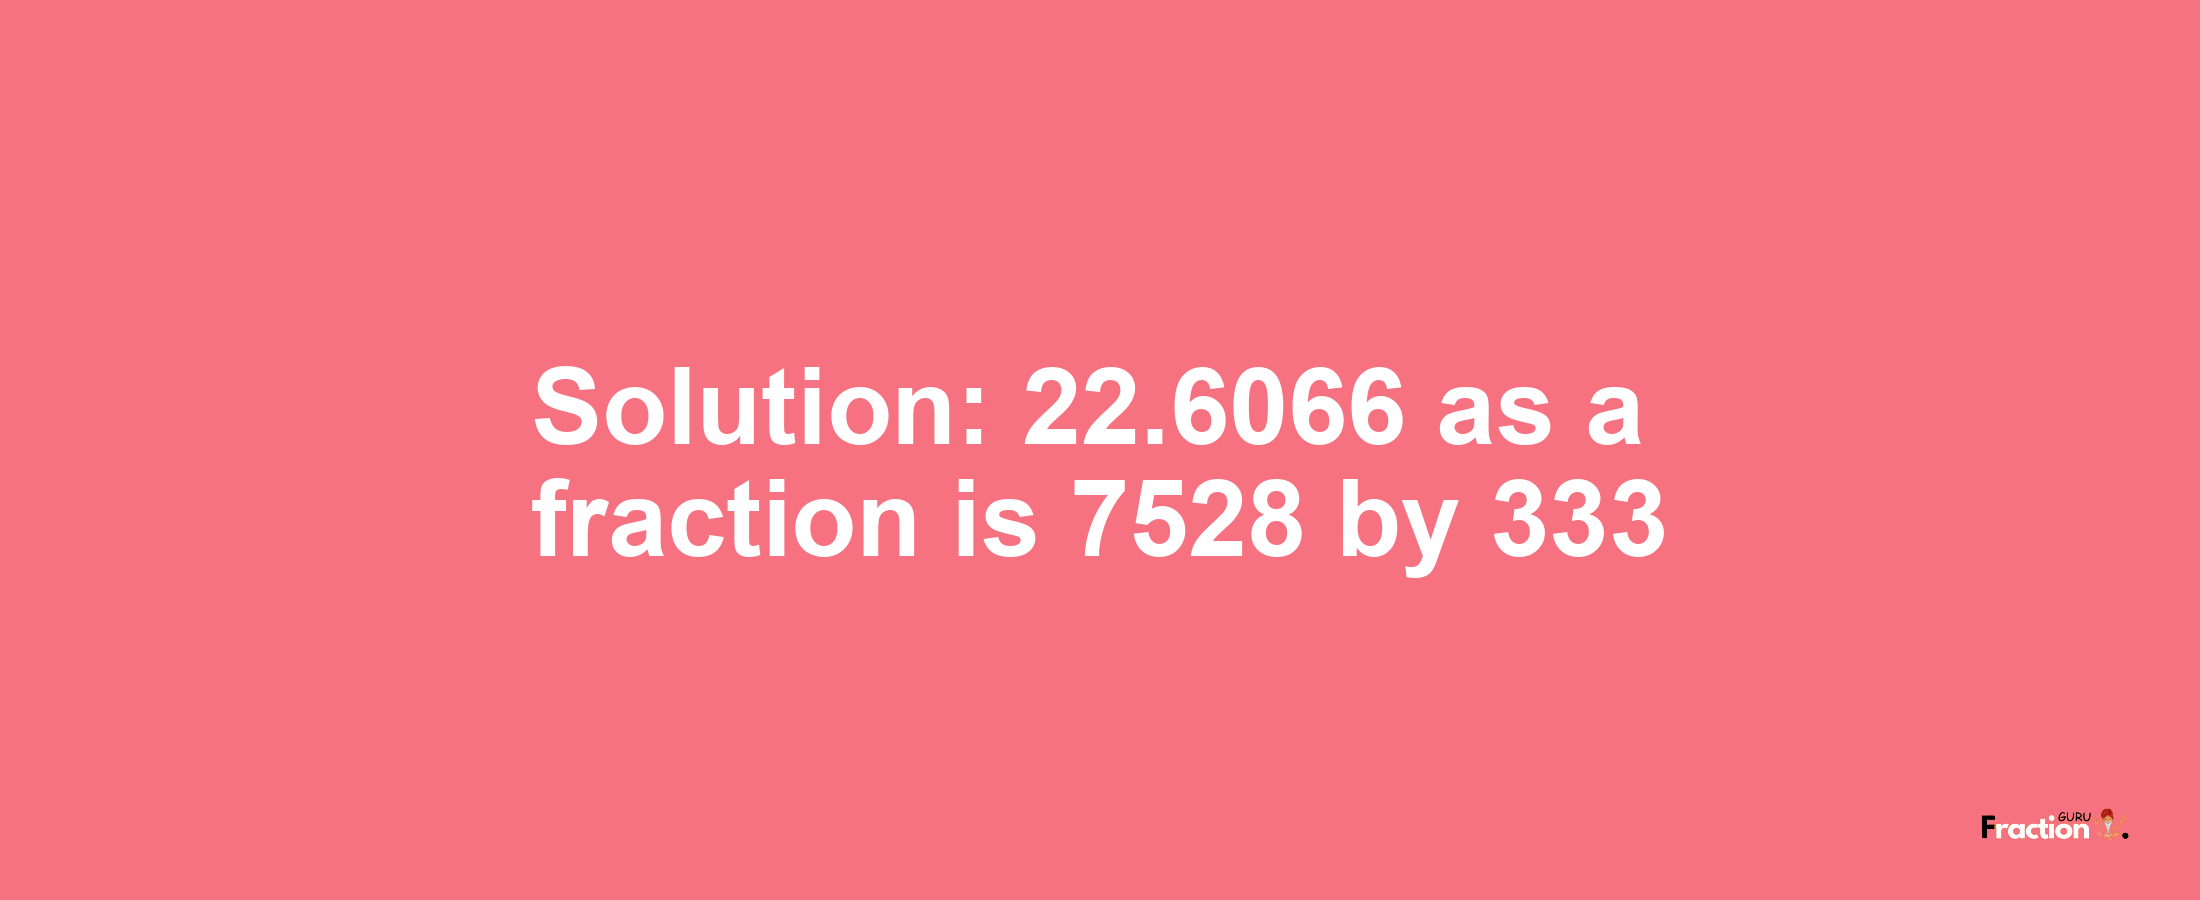 Solution:22.6066 as a fraction is 7528/333